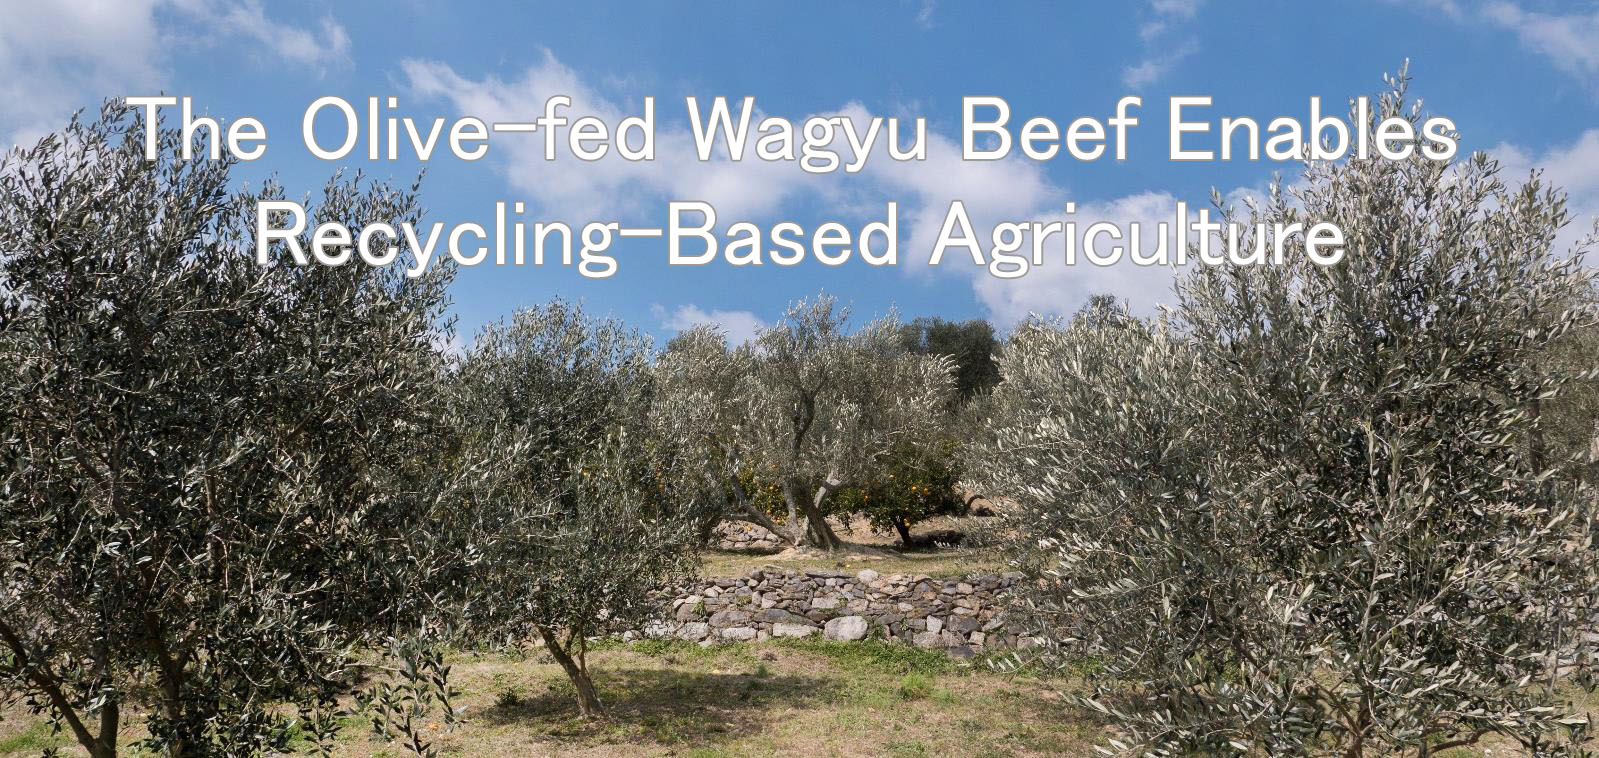 The Olive-fed Wagyu Beef Enables Recycling-Based Agriculture